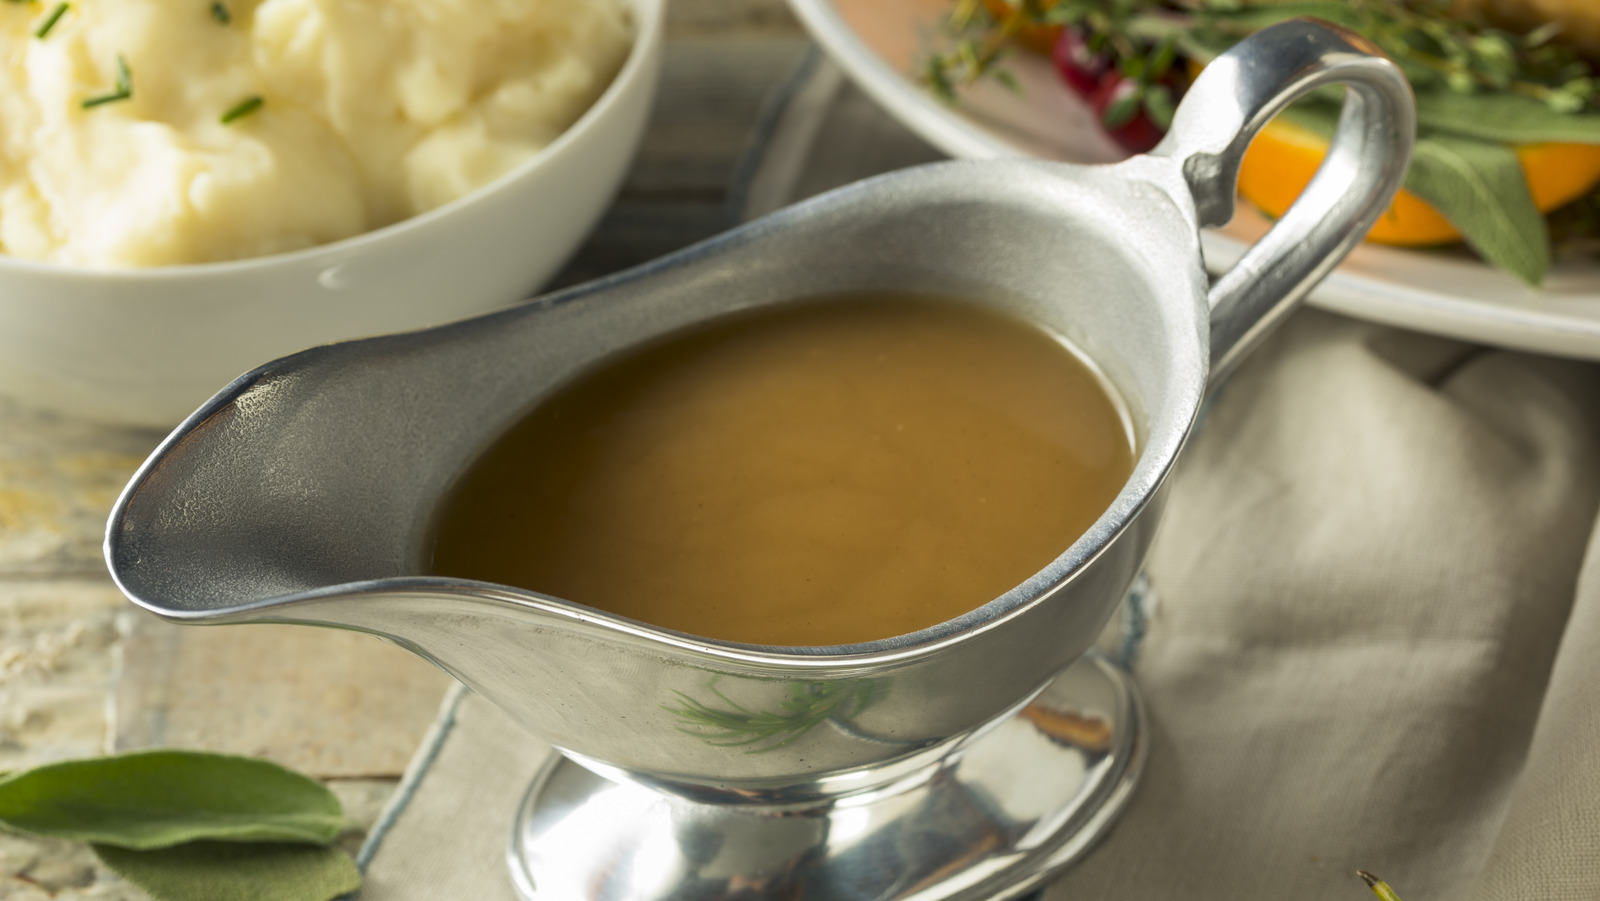 12 Kinds of Gravy You'll Find Across America